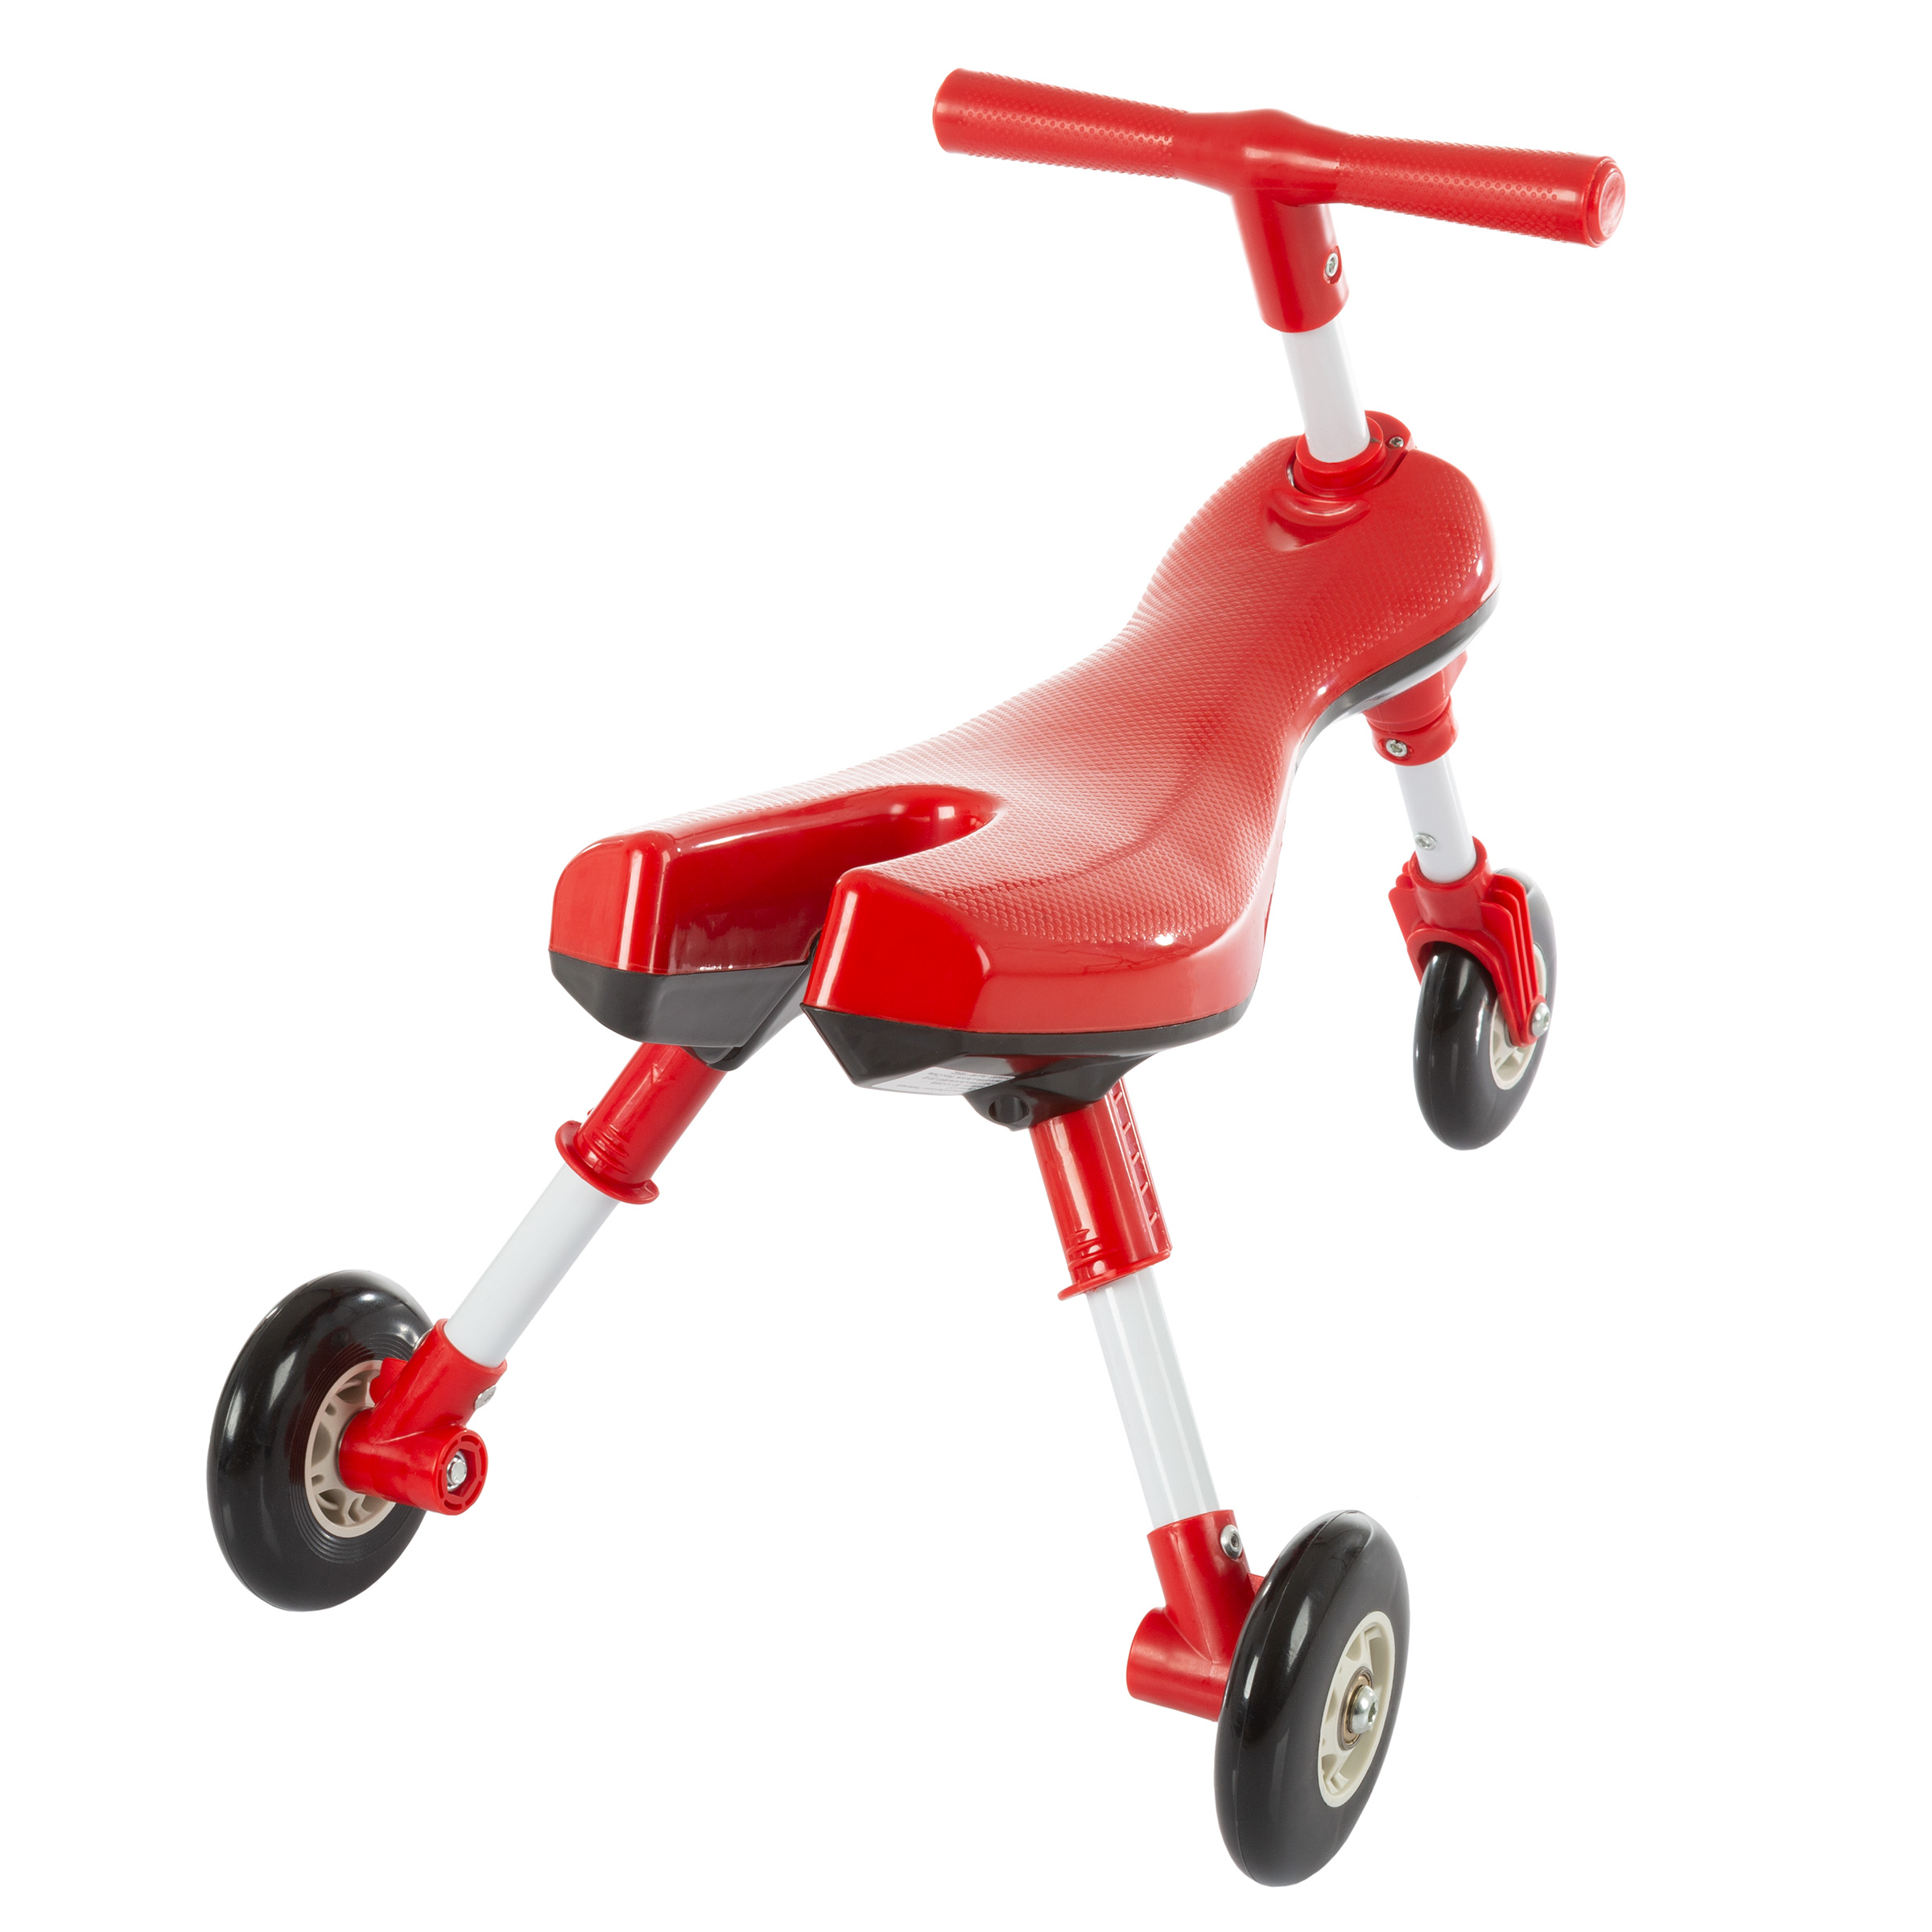 Glide Tricycle- Trike Ride On Toy with No Assembly, Foldable Design, Indoor Outdoor Wheels for Toddlers Learning to Walk, Balance by Lil’ Rider - image 5 of 7